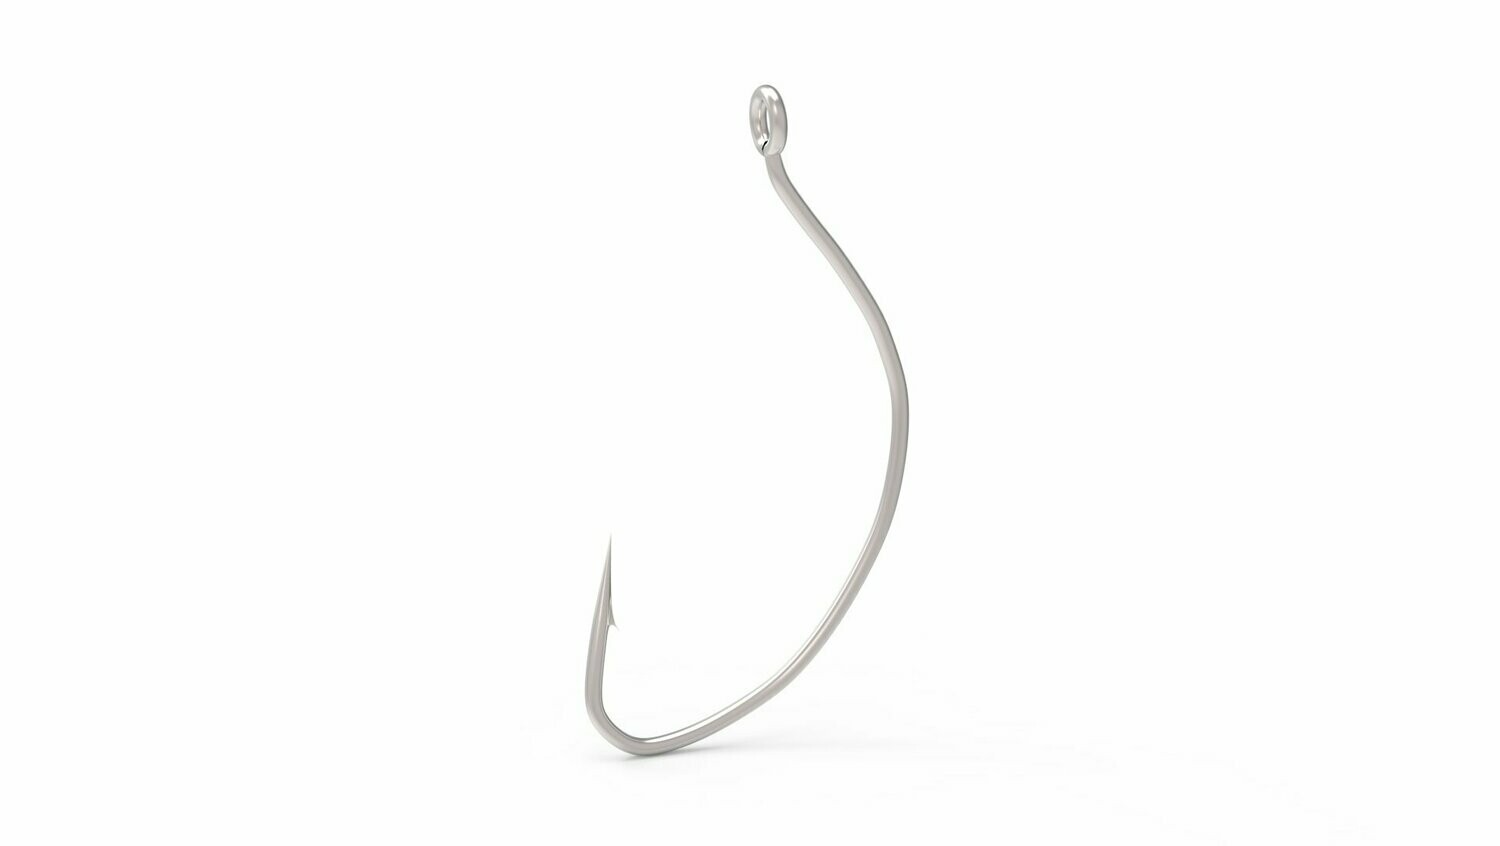 WIDE Gap with Turned-up eye, Nickel Dynamic Cutting Edge Point (25 Hooks per Pack.)